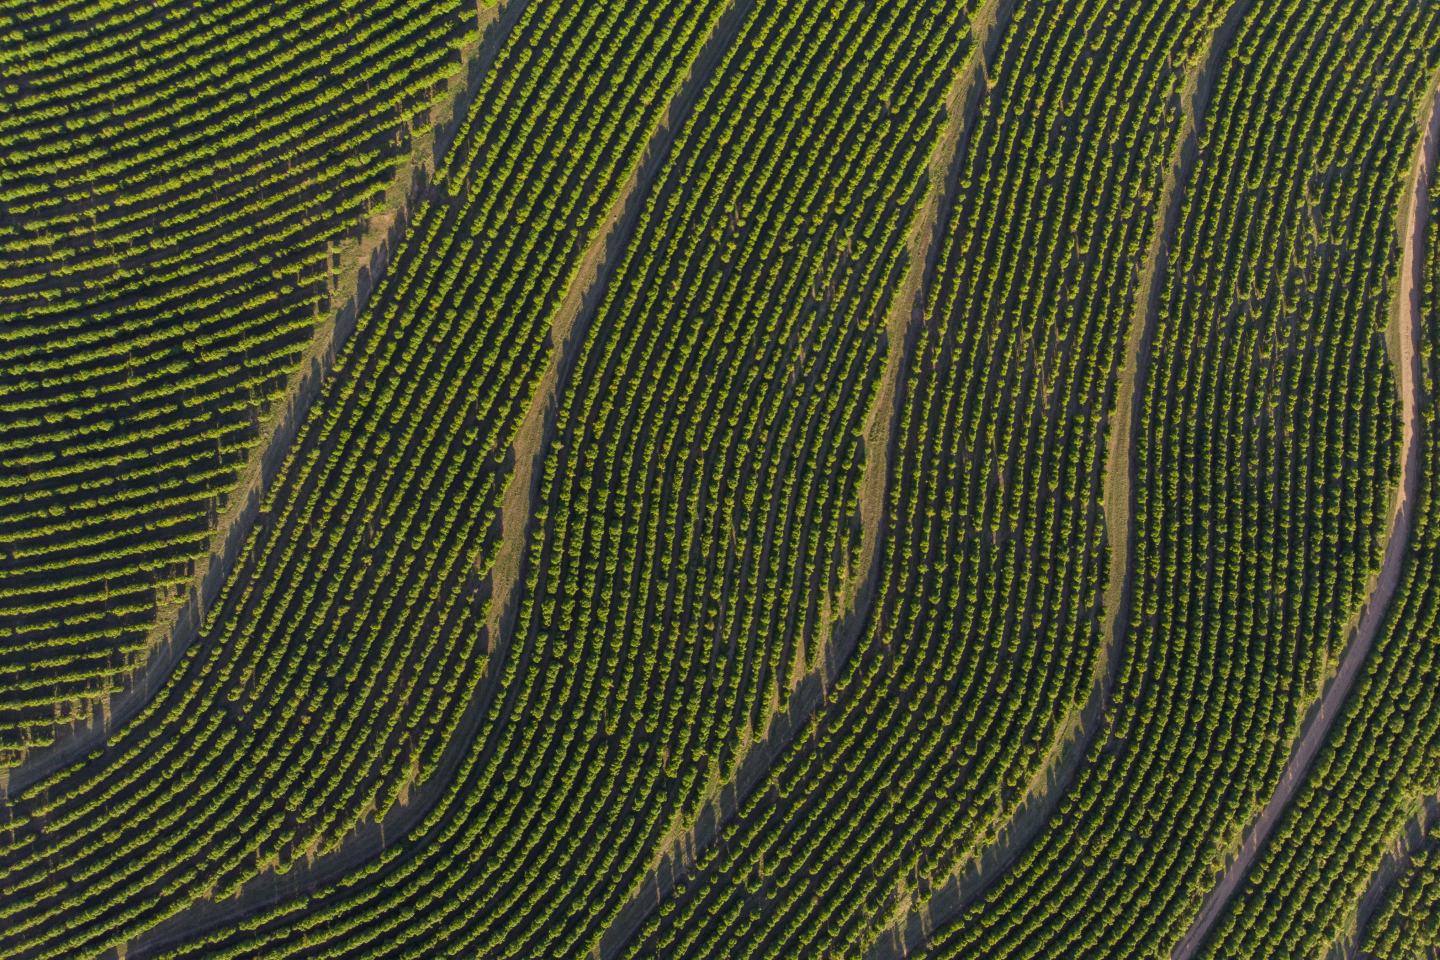 Aerial view of field. Sustainability, innovation, agrochem, agritech.